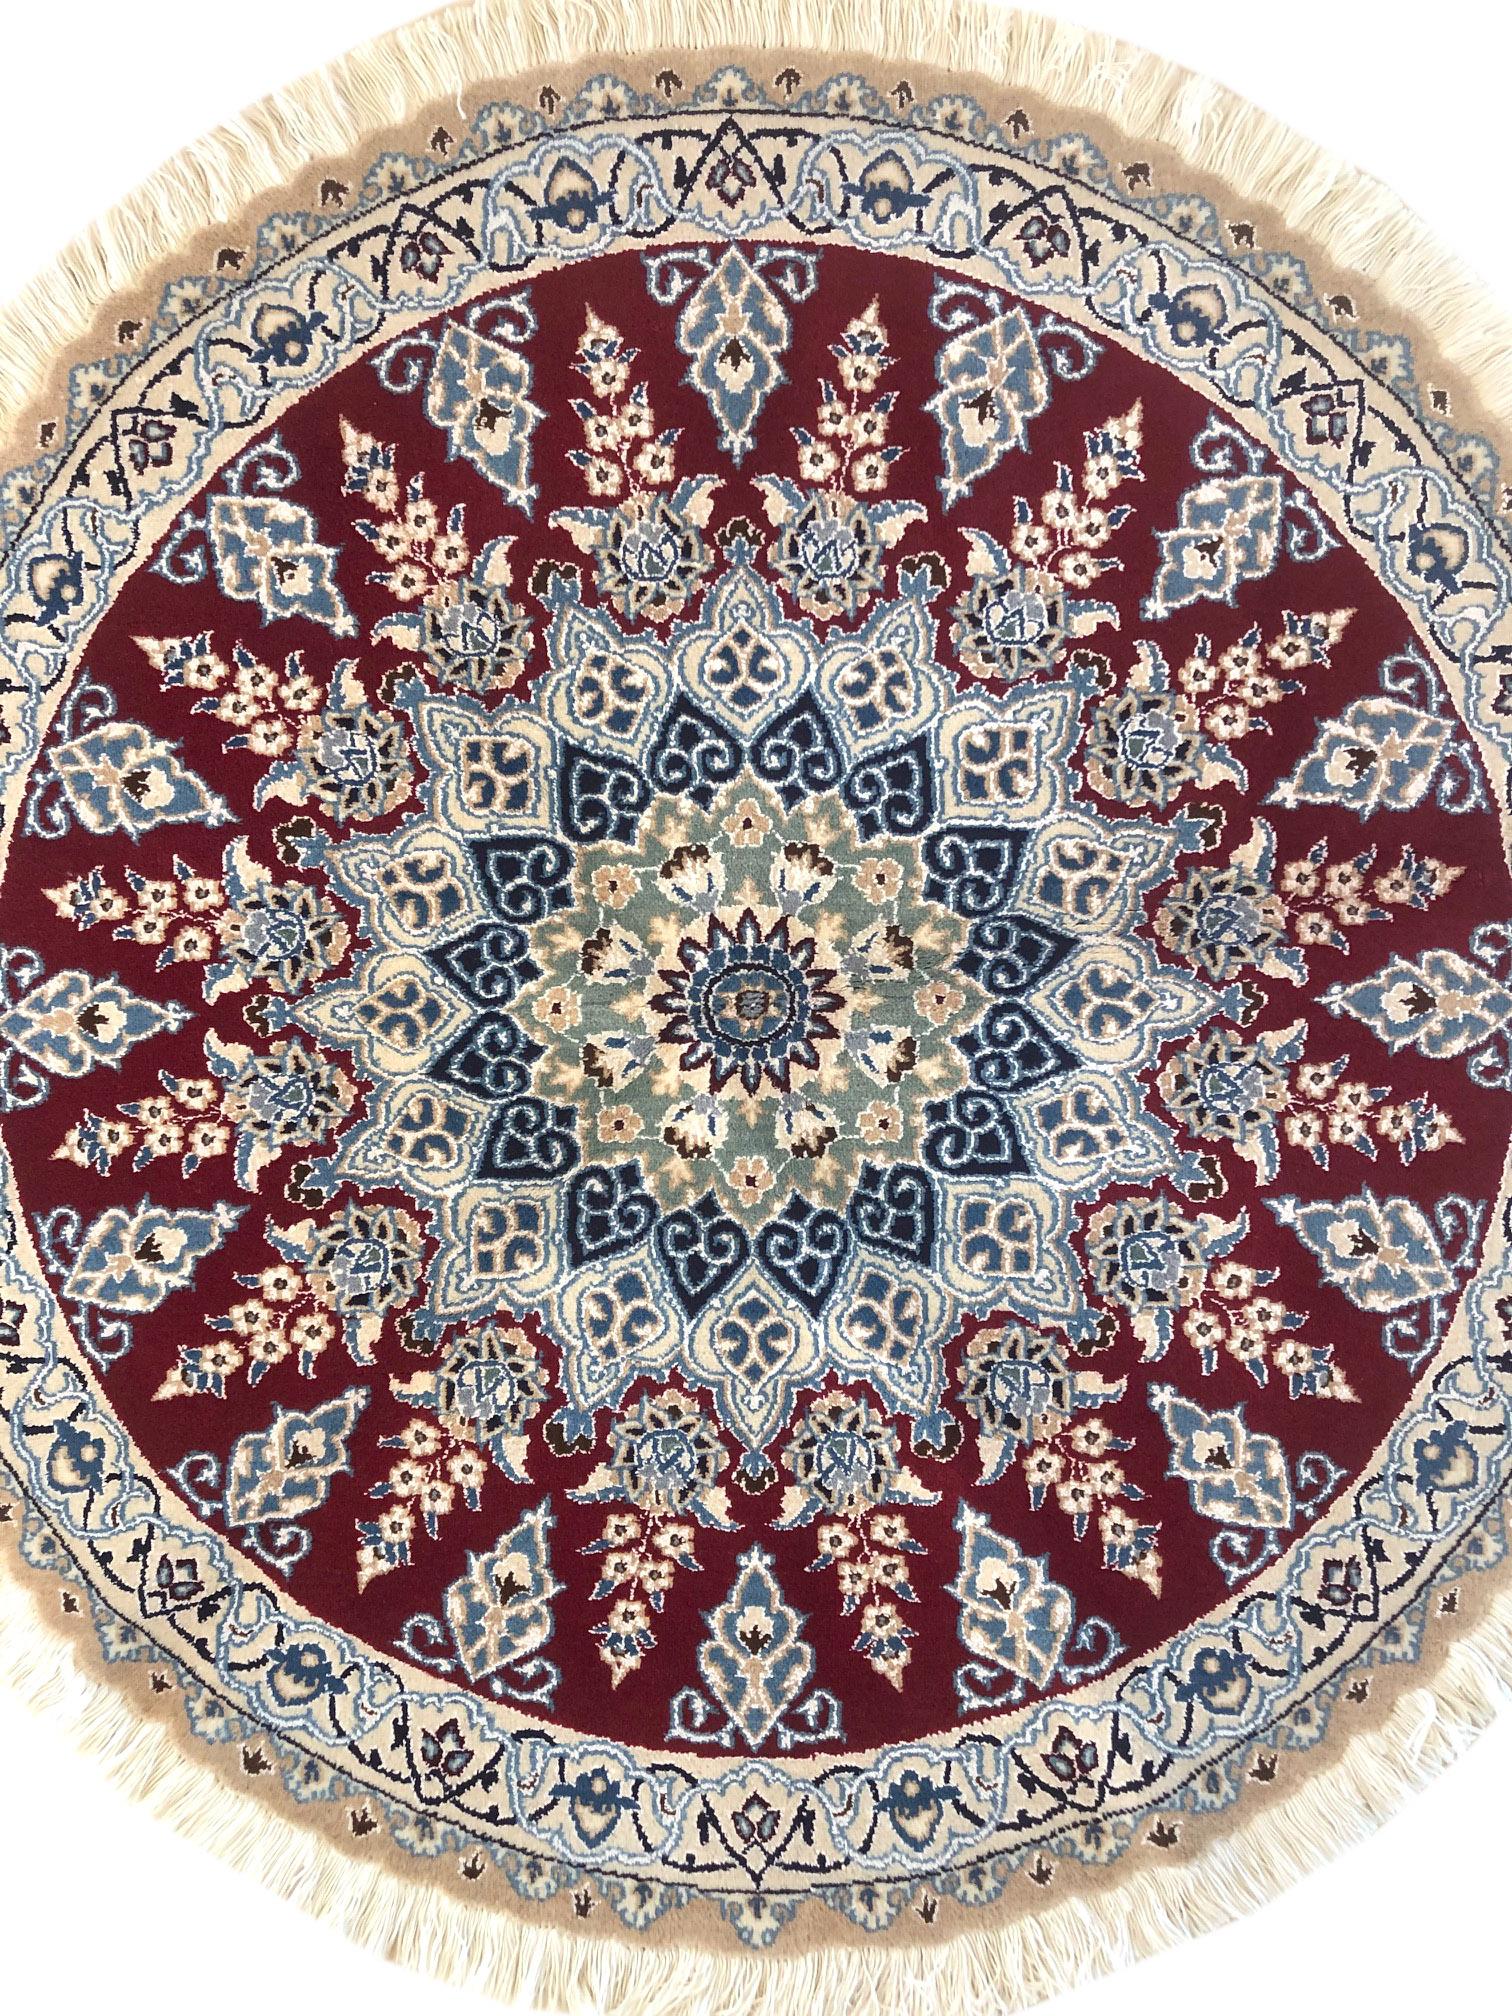 This authentic Persian round handmade Nain (9 LA) rug has wool and silk pile with cotton foundation. Nain is a city in Iran that is well known for producing Fine handmade rug. This rug has medallion floral design. The base color is red and cream